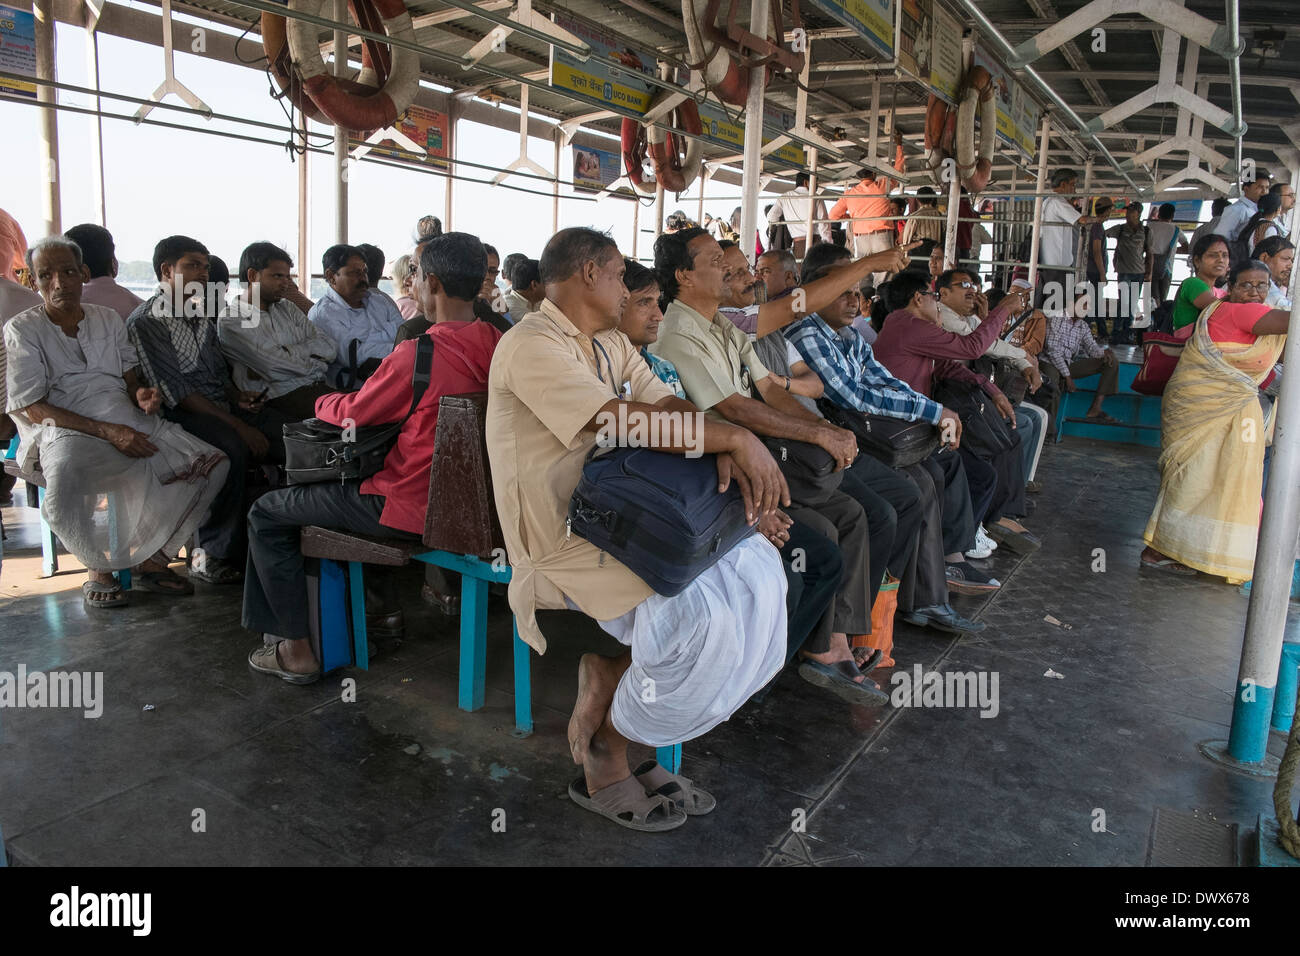 India, West Bengal, Kolkata, passengers on a ferry on the Hooghly River Stock Photo